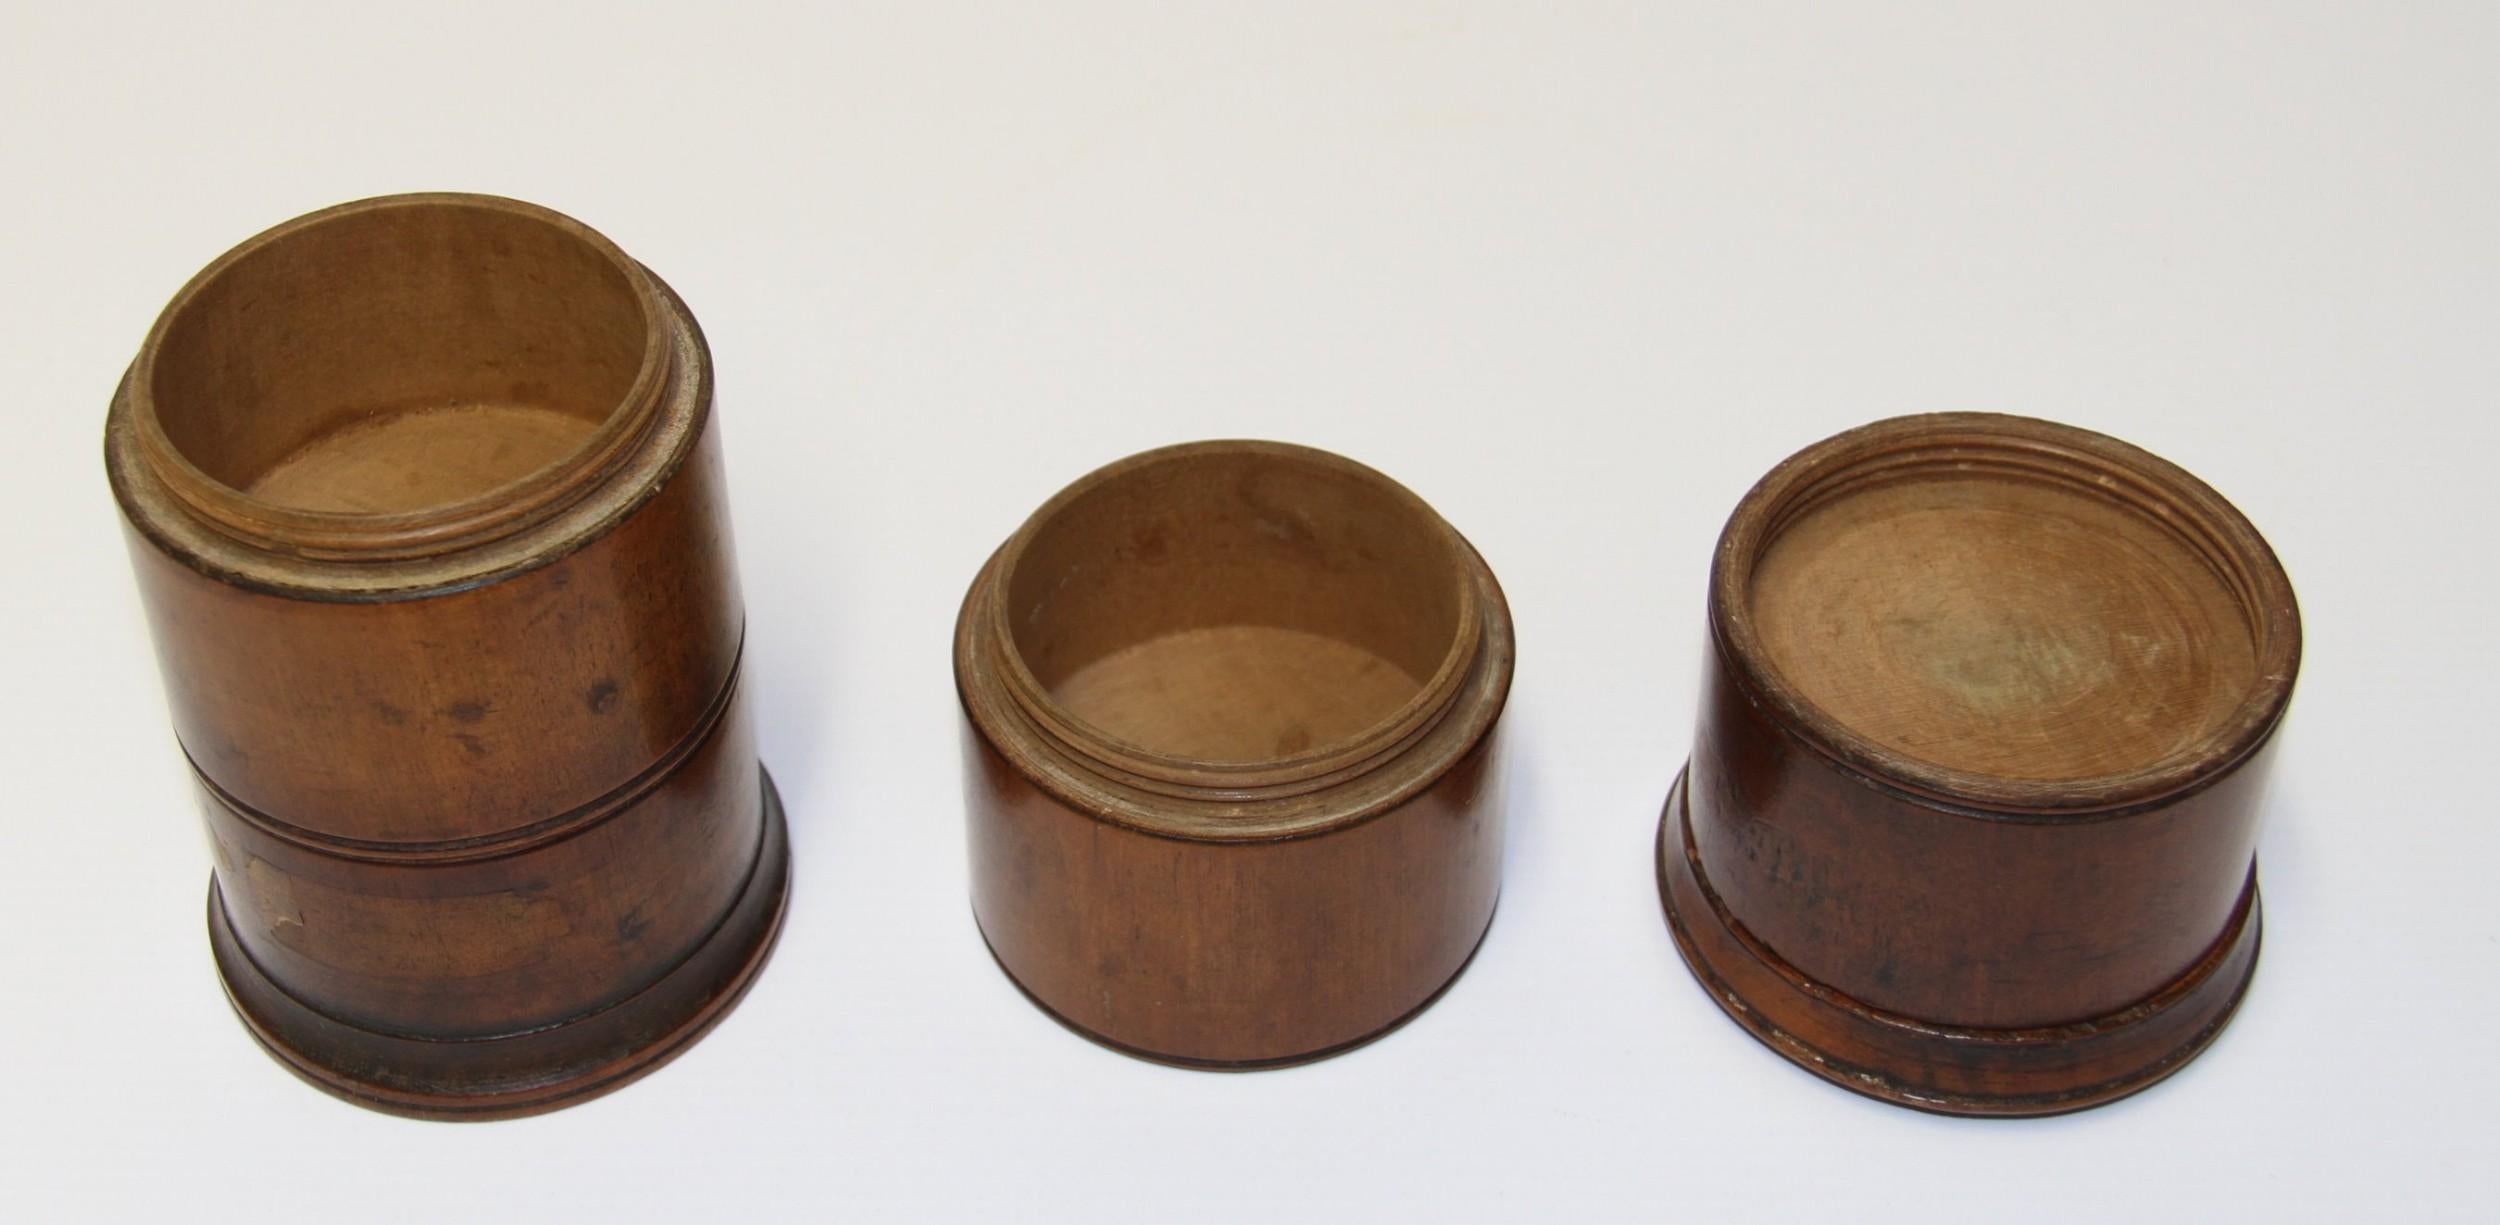 Antique Early 19th Century Treen Spice Container made from Walnut, circa 1830 1